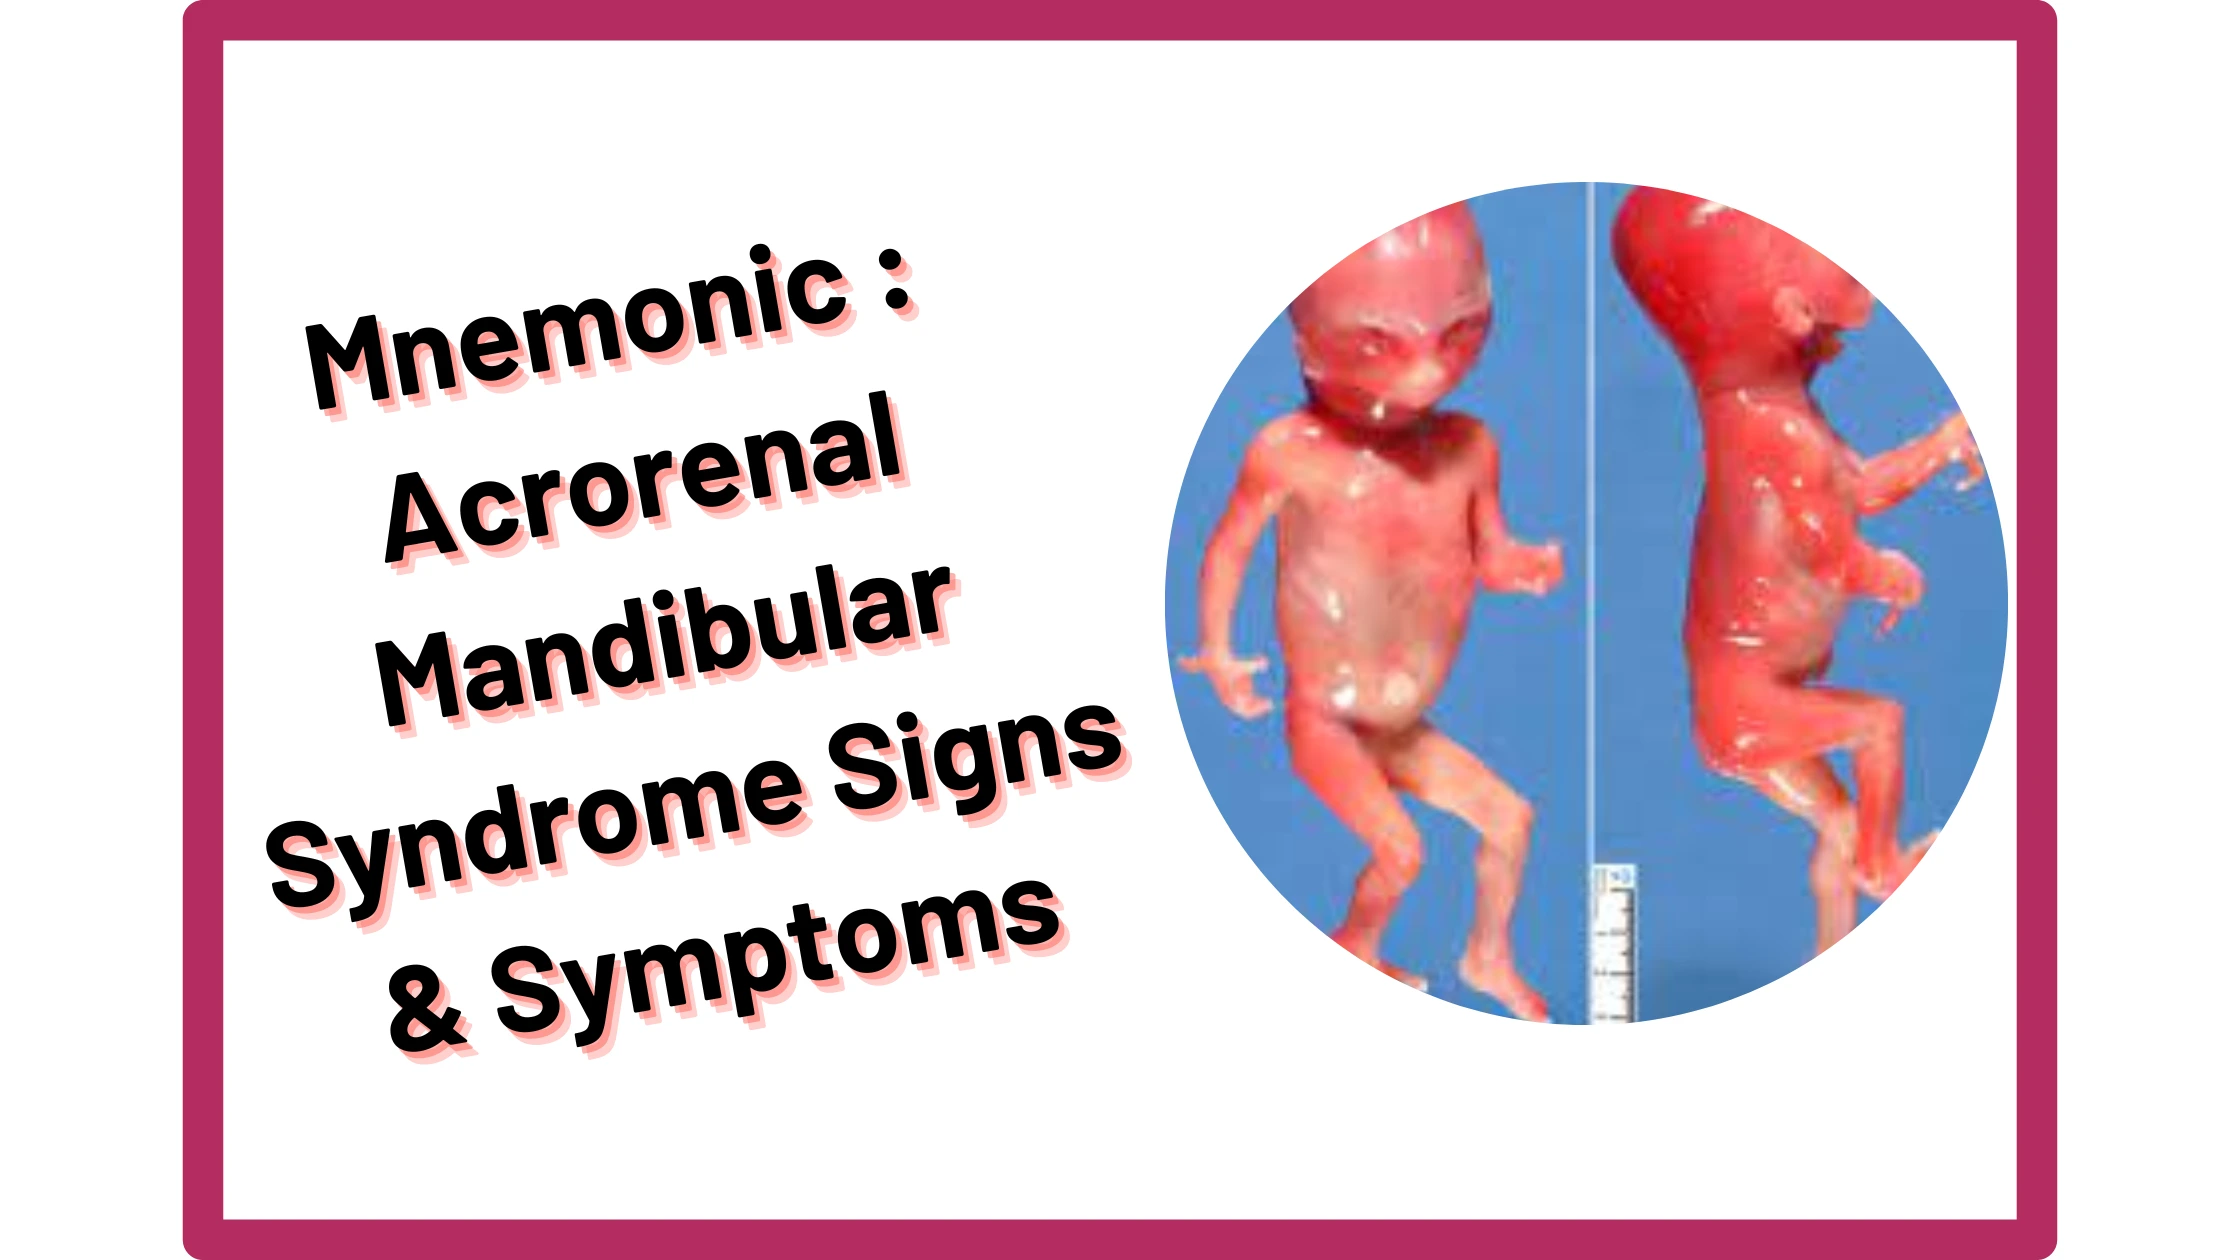 You are currently viewing [Very Cool] Mnemonic : Acrorenal Mandibular Syndrome Signs & Symptoms